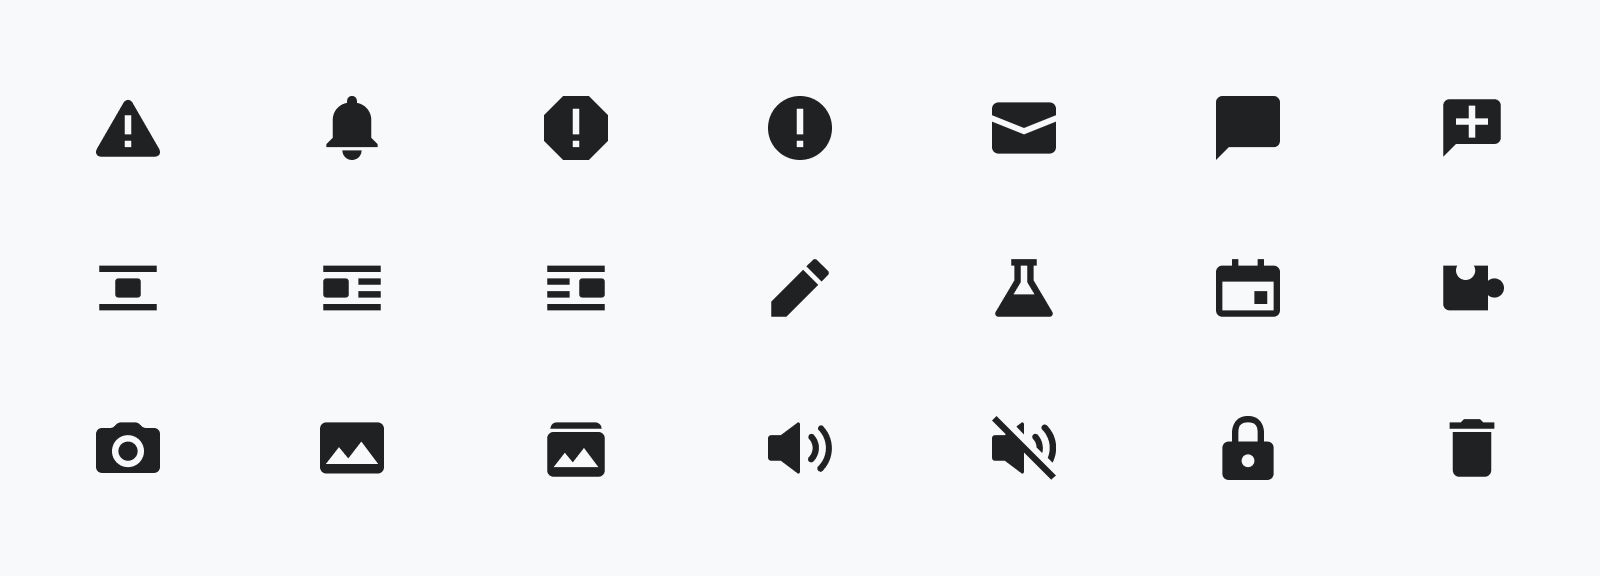 Wikimedia Design System icon collection excerpt